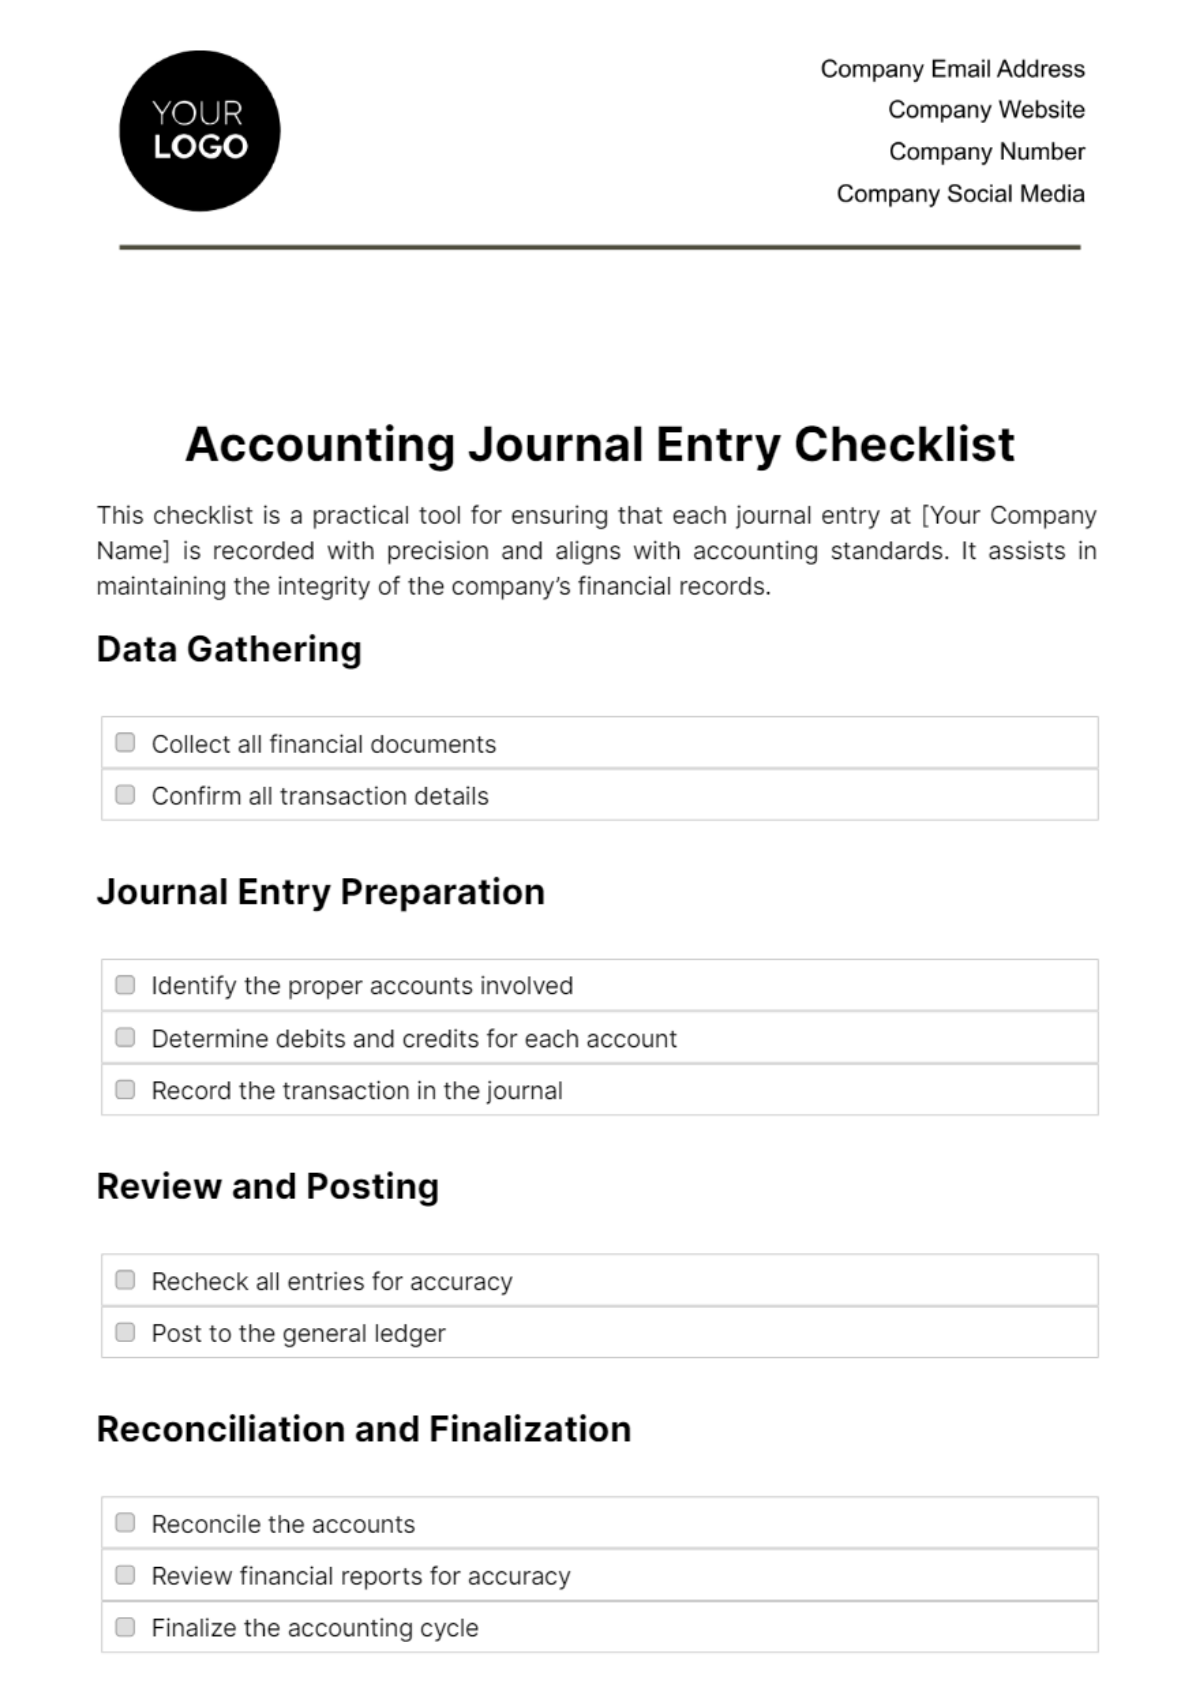 Free Accounting Journal Entry Checklist Template